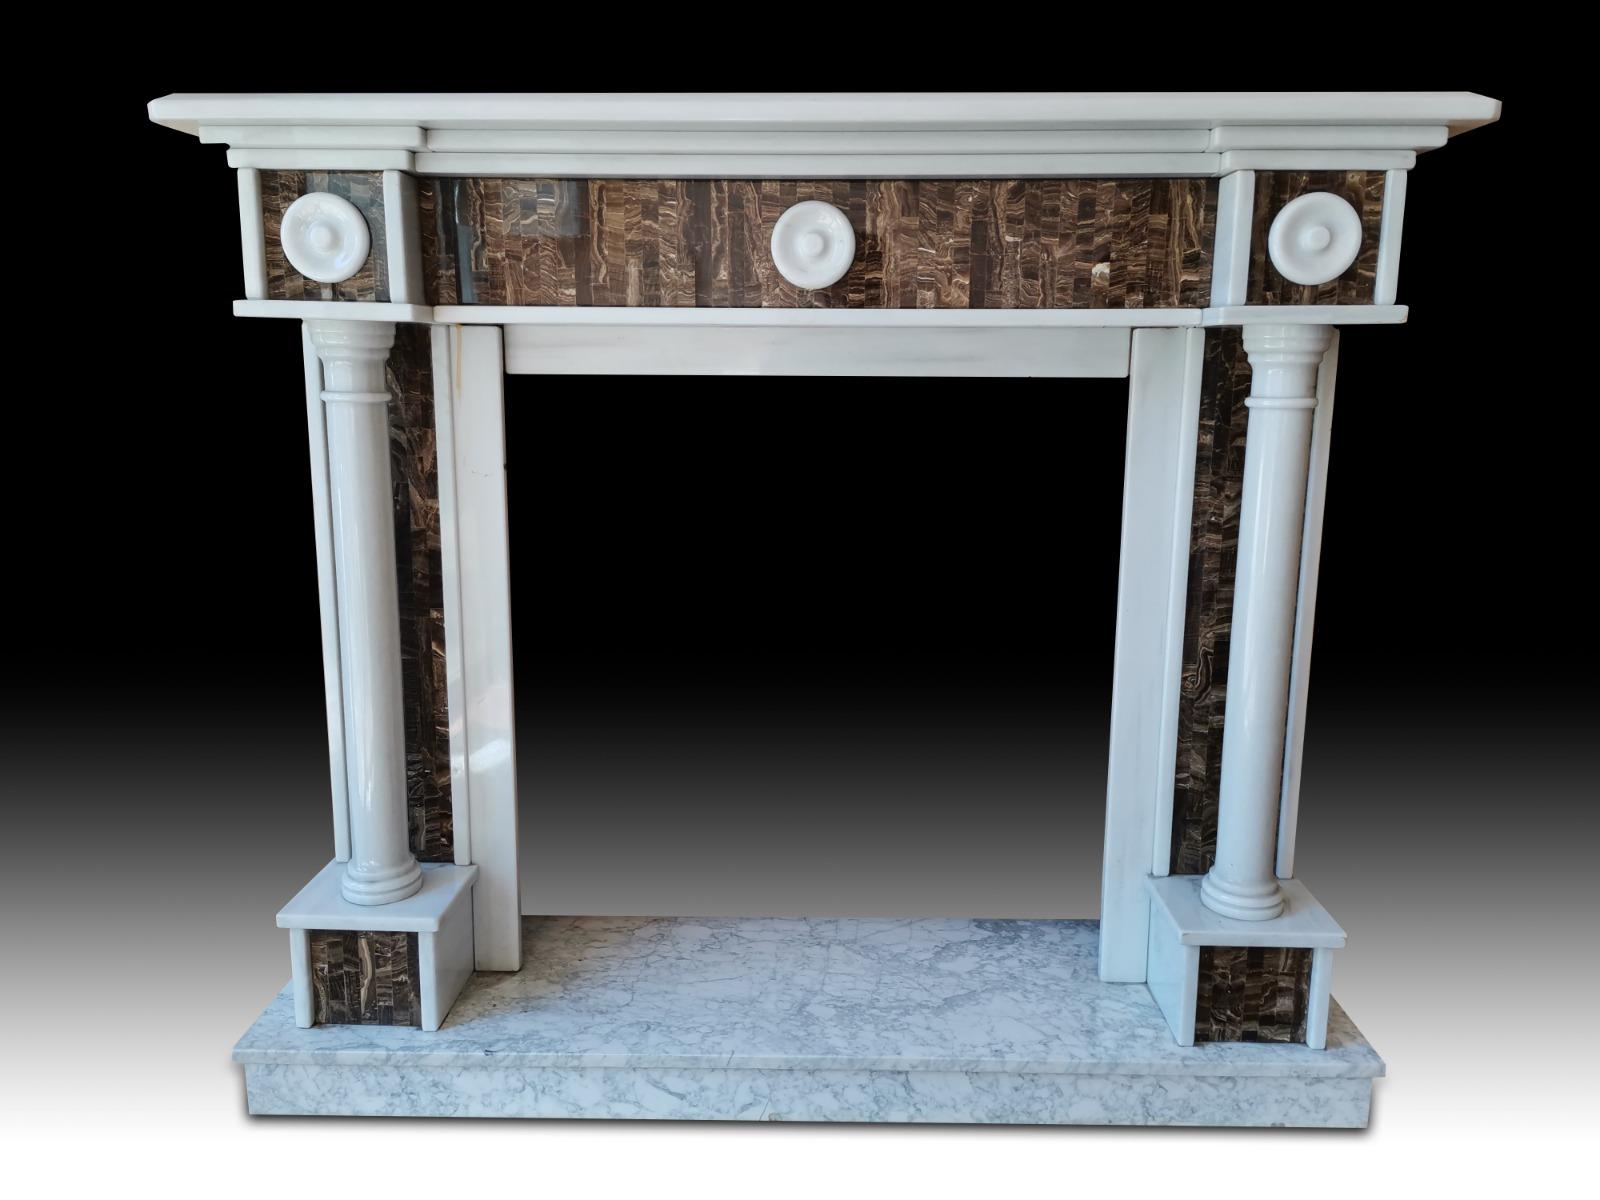 Classic marble fireplace.
Important and very nice fireplace in Carrara marble and agate from the 20th century. Very good condition, no lack, no restoration needed. Dimensions 140 cm length by 121 cm height, depth 37 cm.